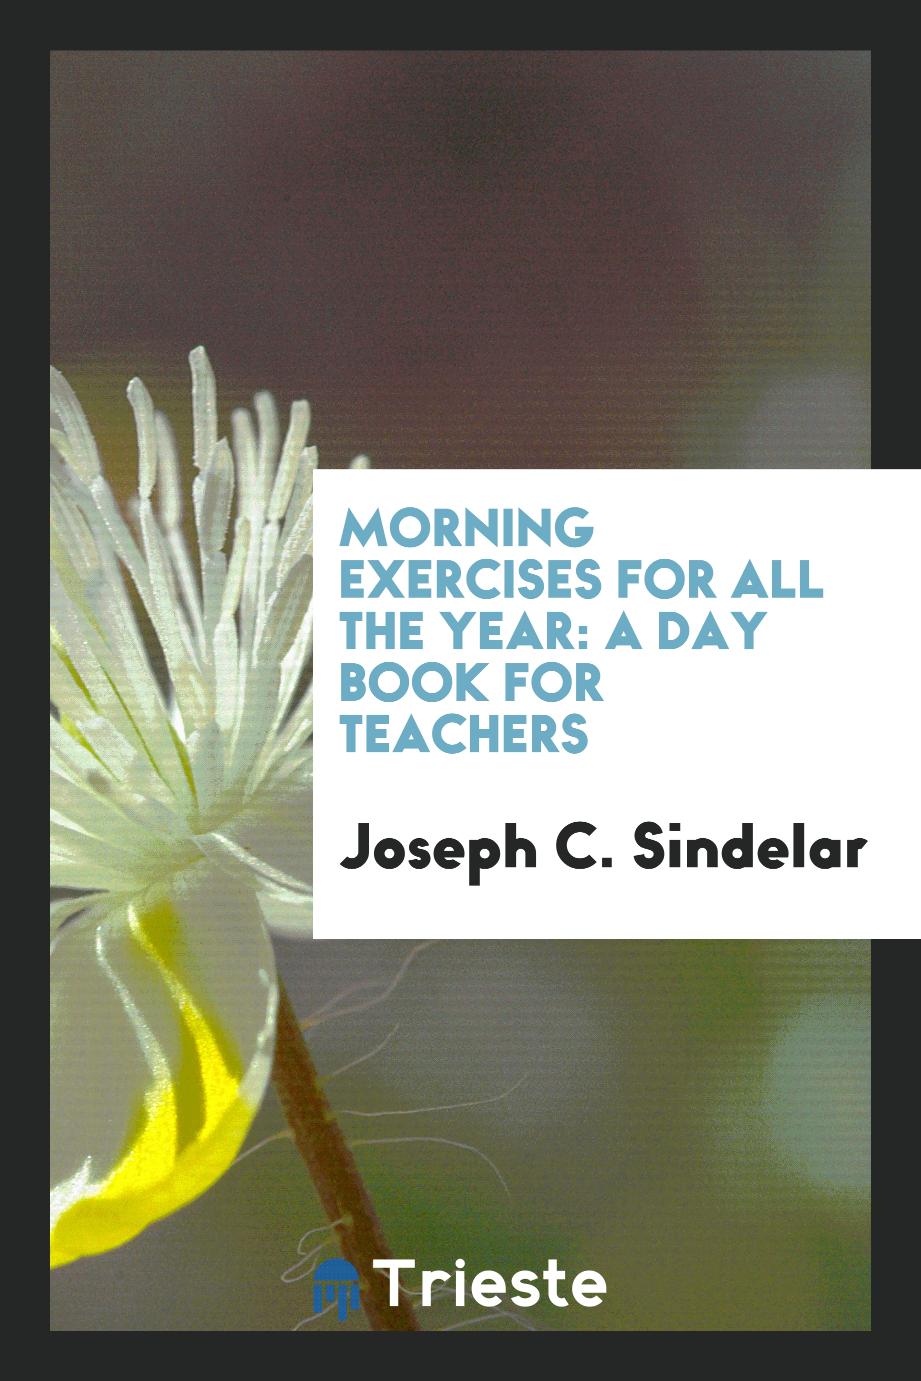 Morning exercises for all the year: a day book for teachers